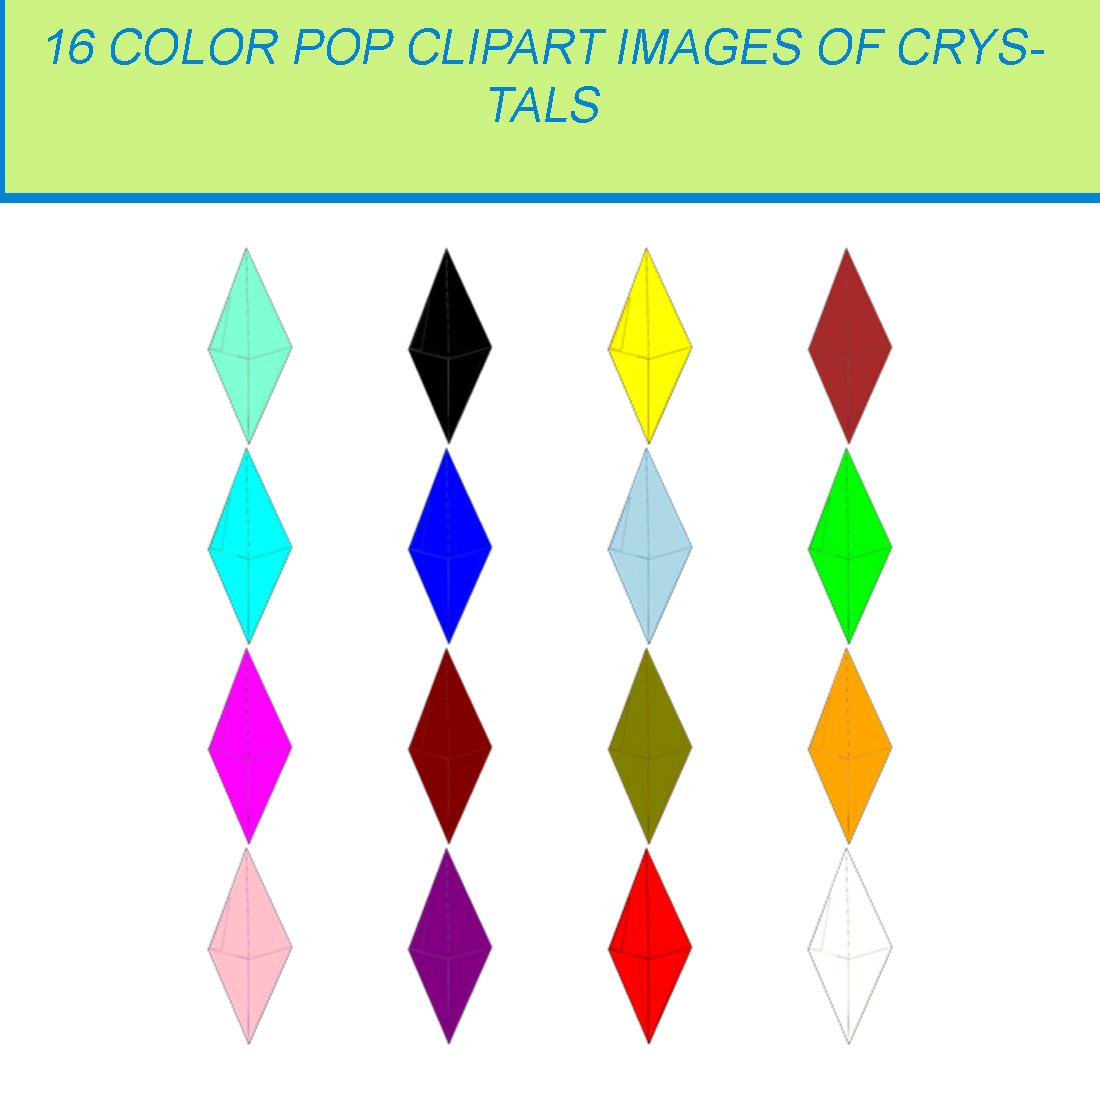 16 COLOR POP CLIPART IMAGES OF CRYSTAL cover image.